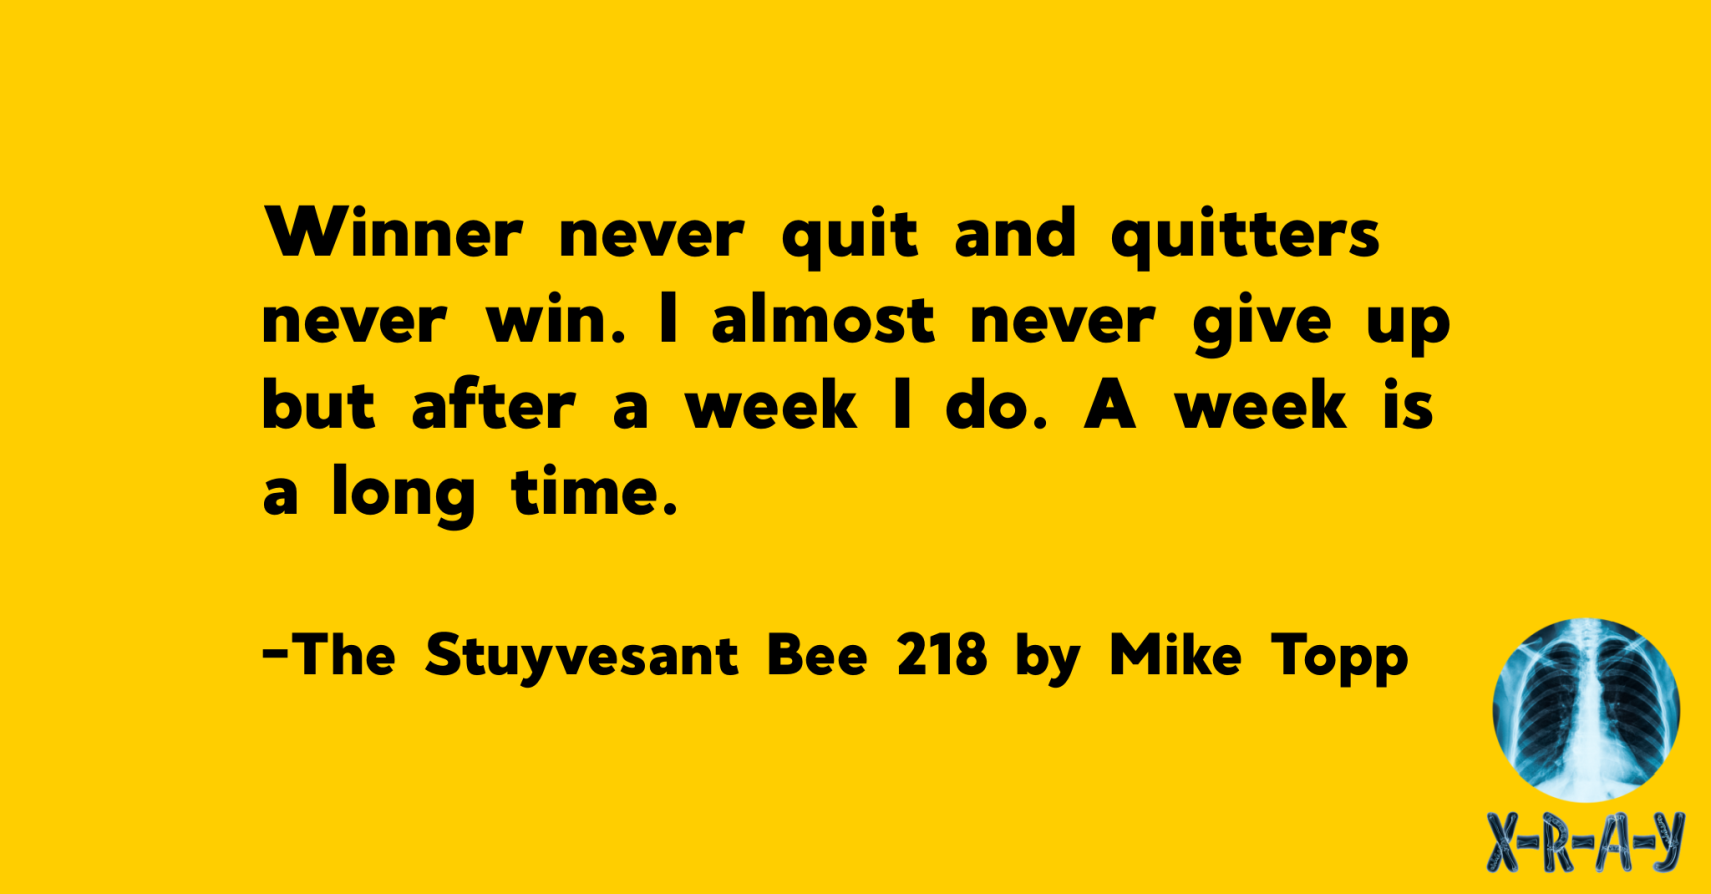 THE STUYVESANT BEE 218 by Mike Topp